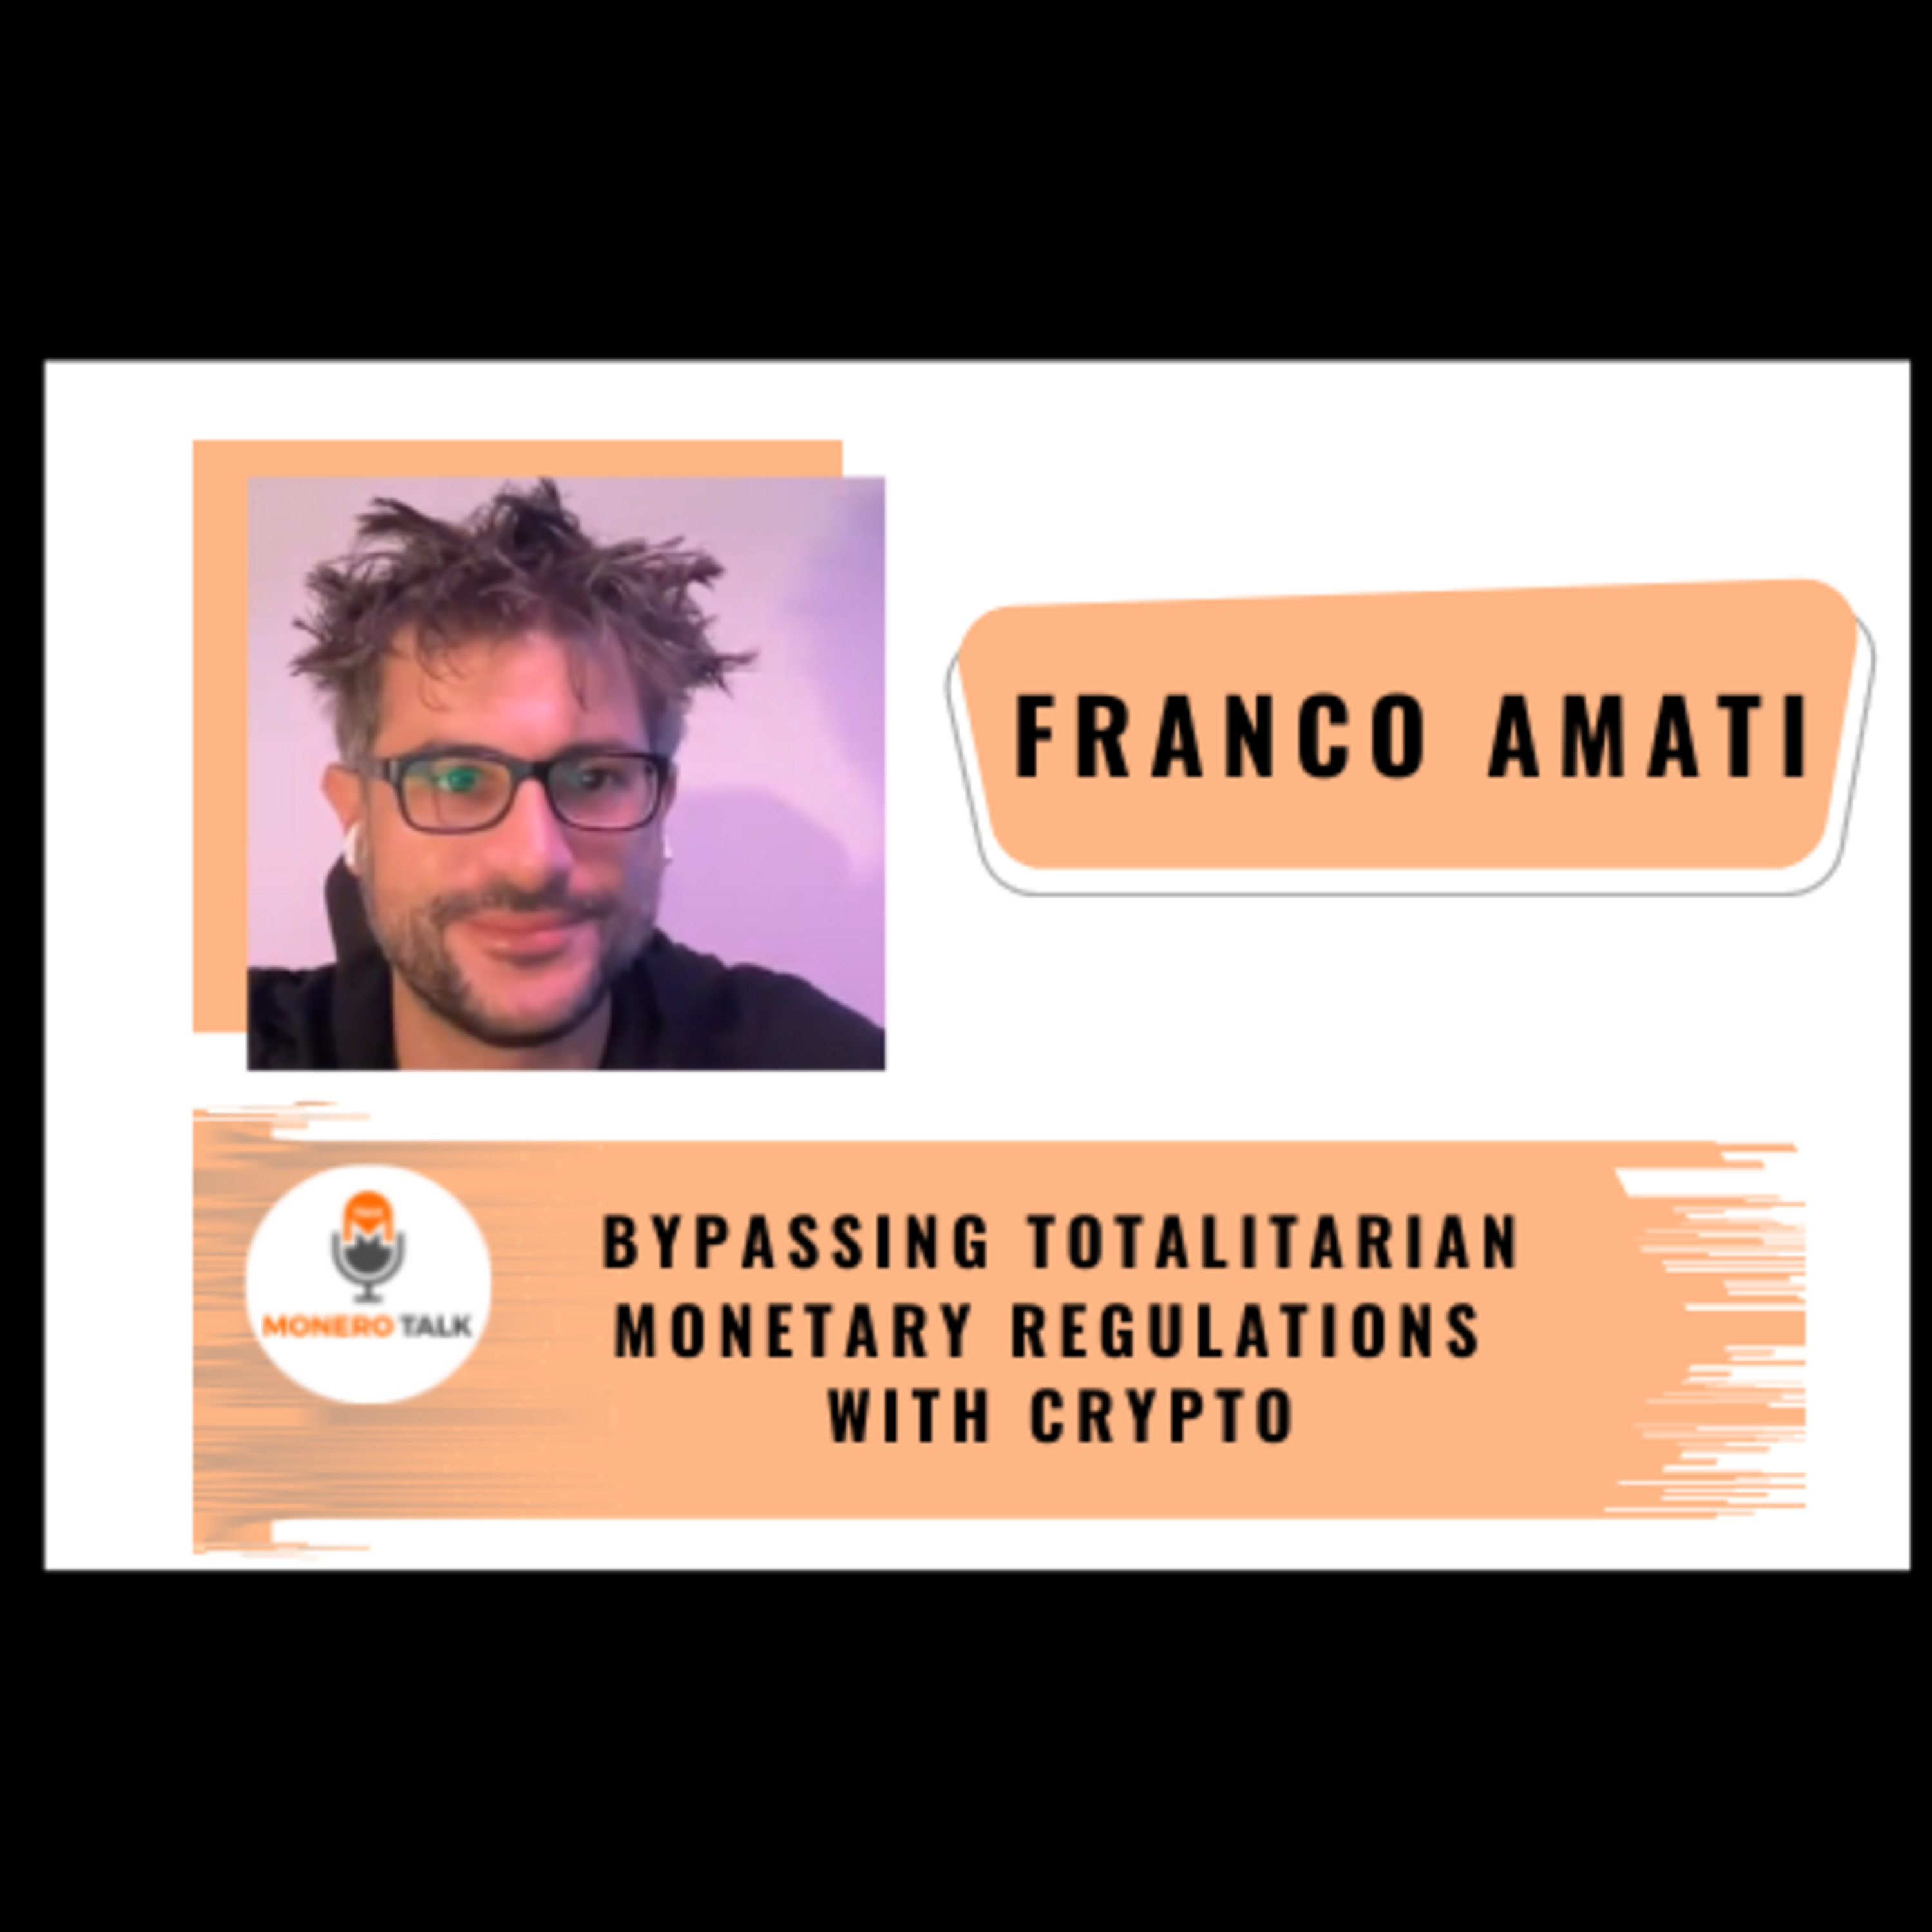 Bypassing Totalitarian Monetary Regulations with Crypto - Franco Amati